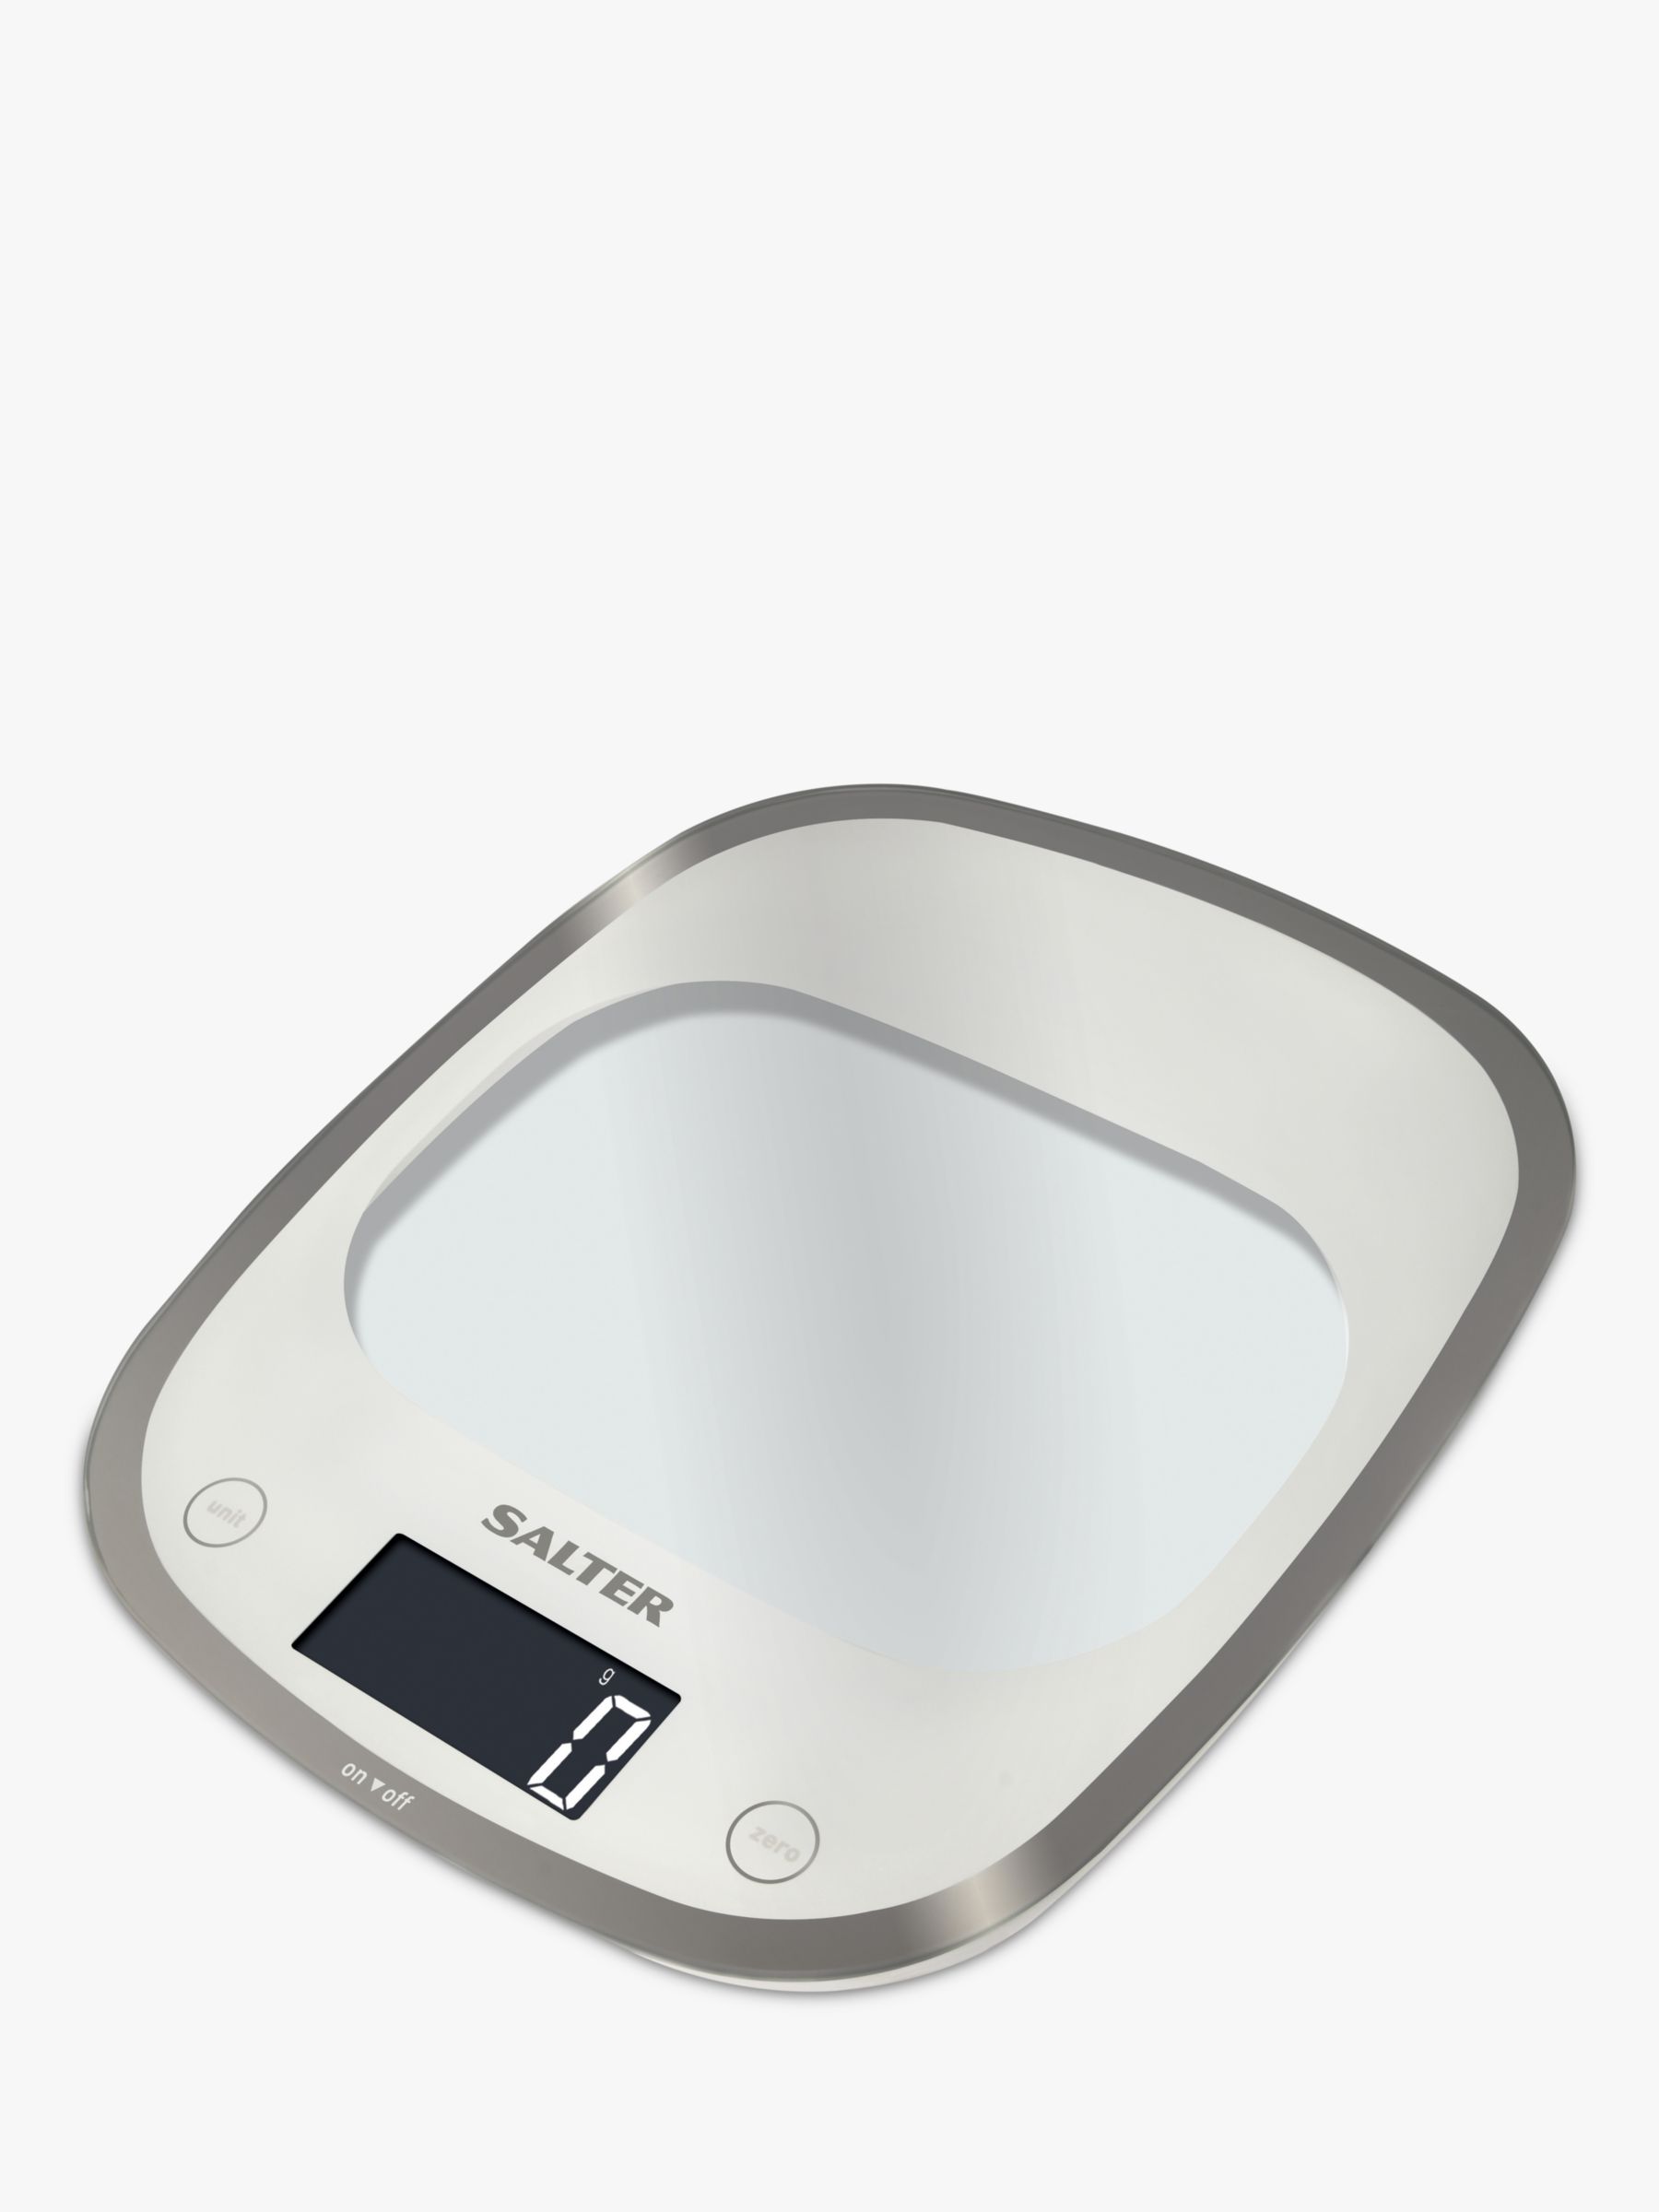 Photo of Salter curve glass electronic digital kitchen scale white